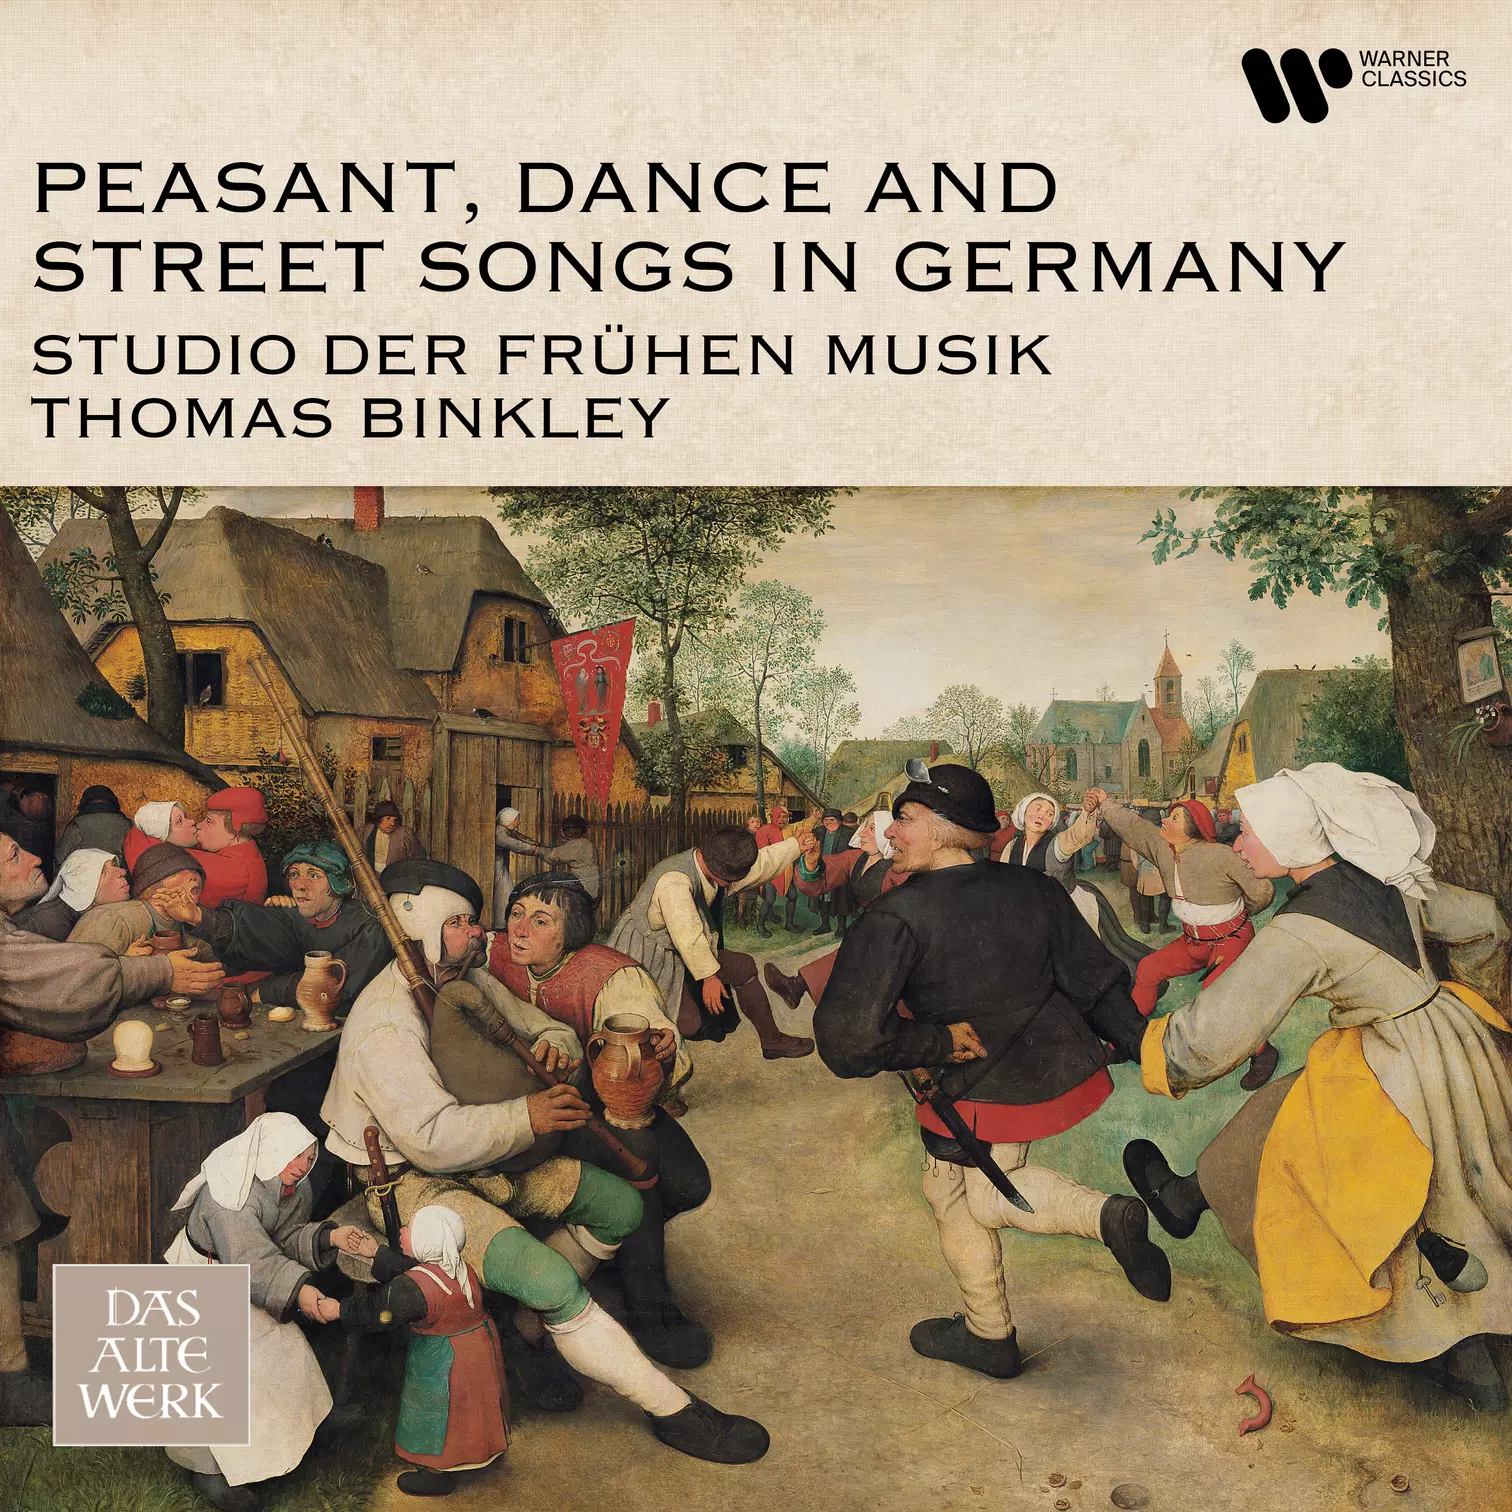 Peasant, Dance and Street Songs in Germany